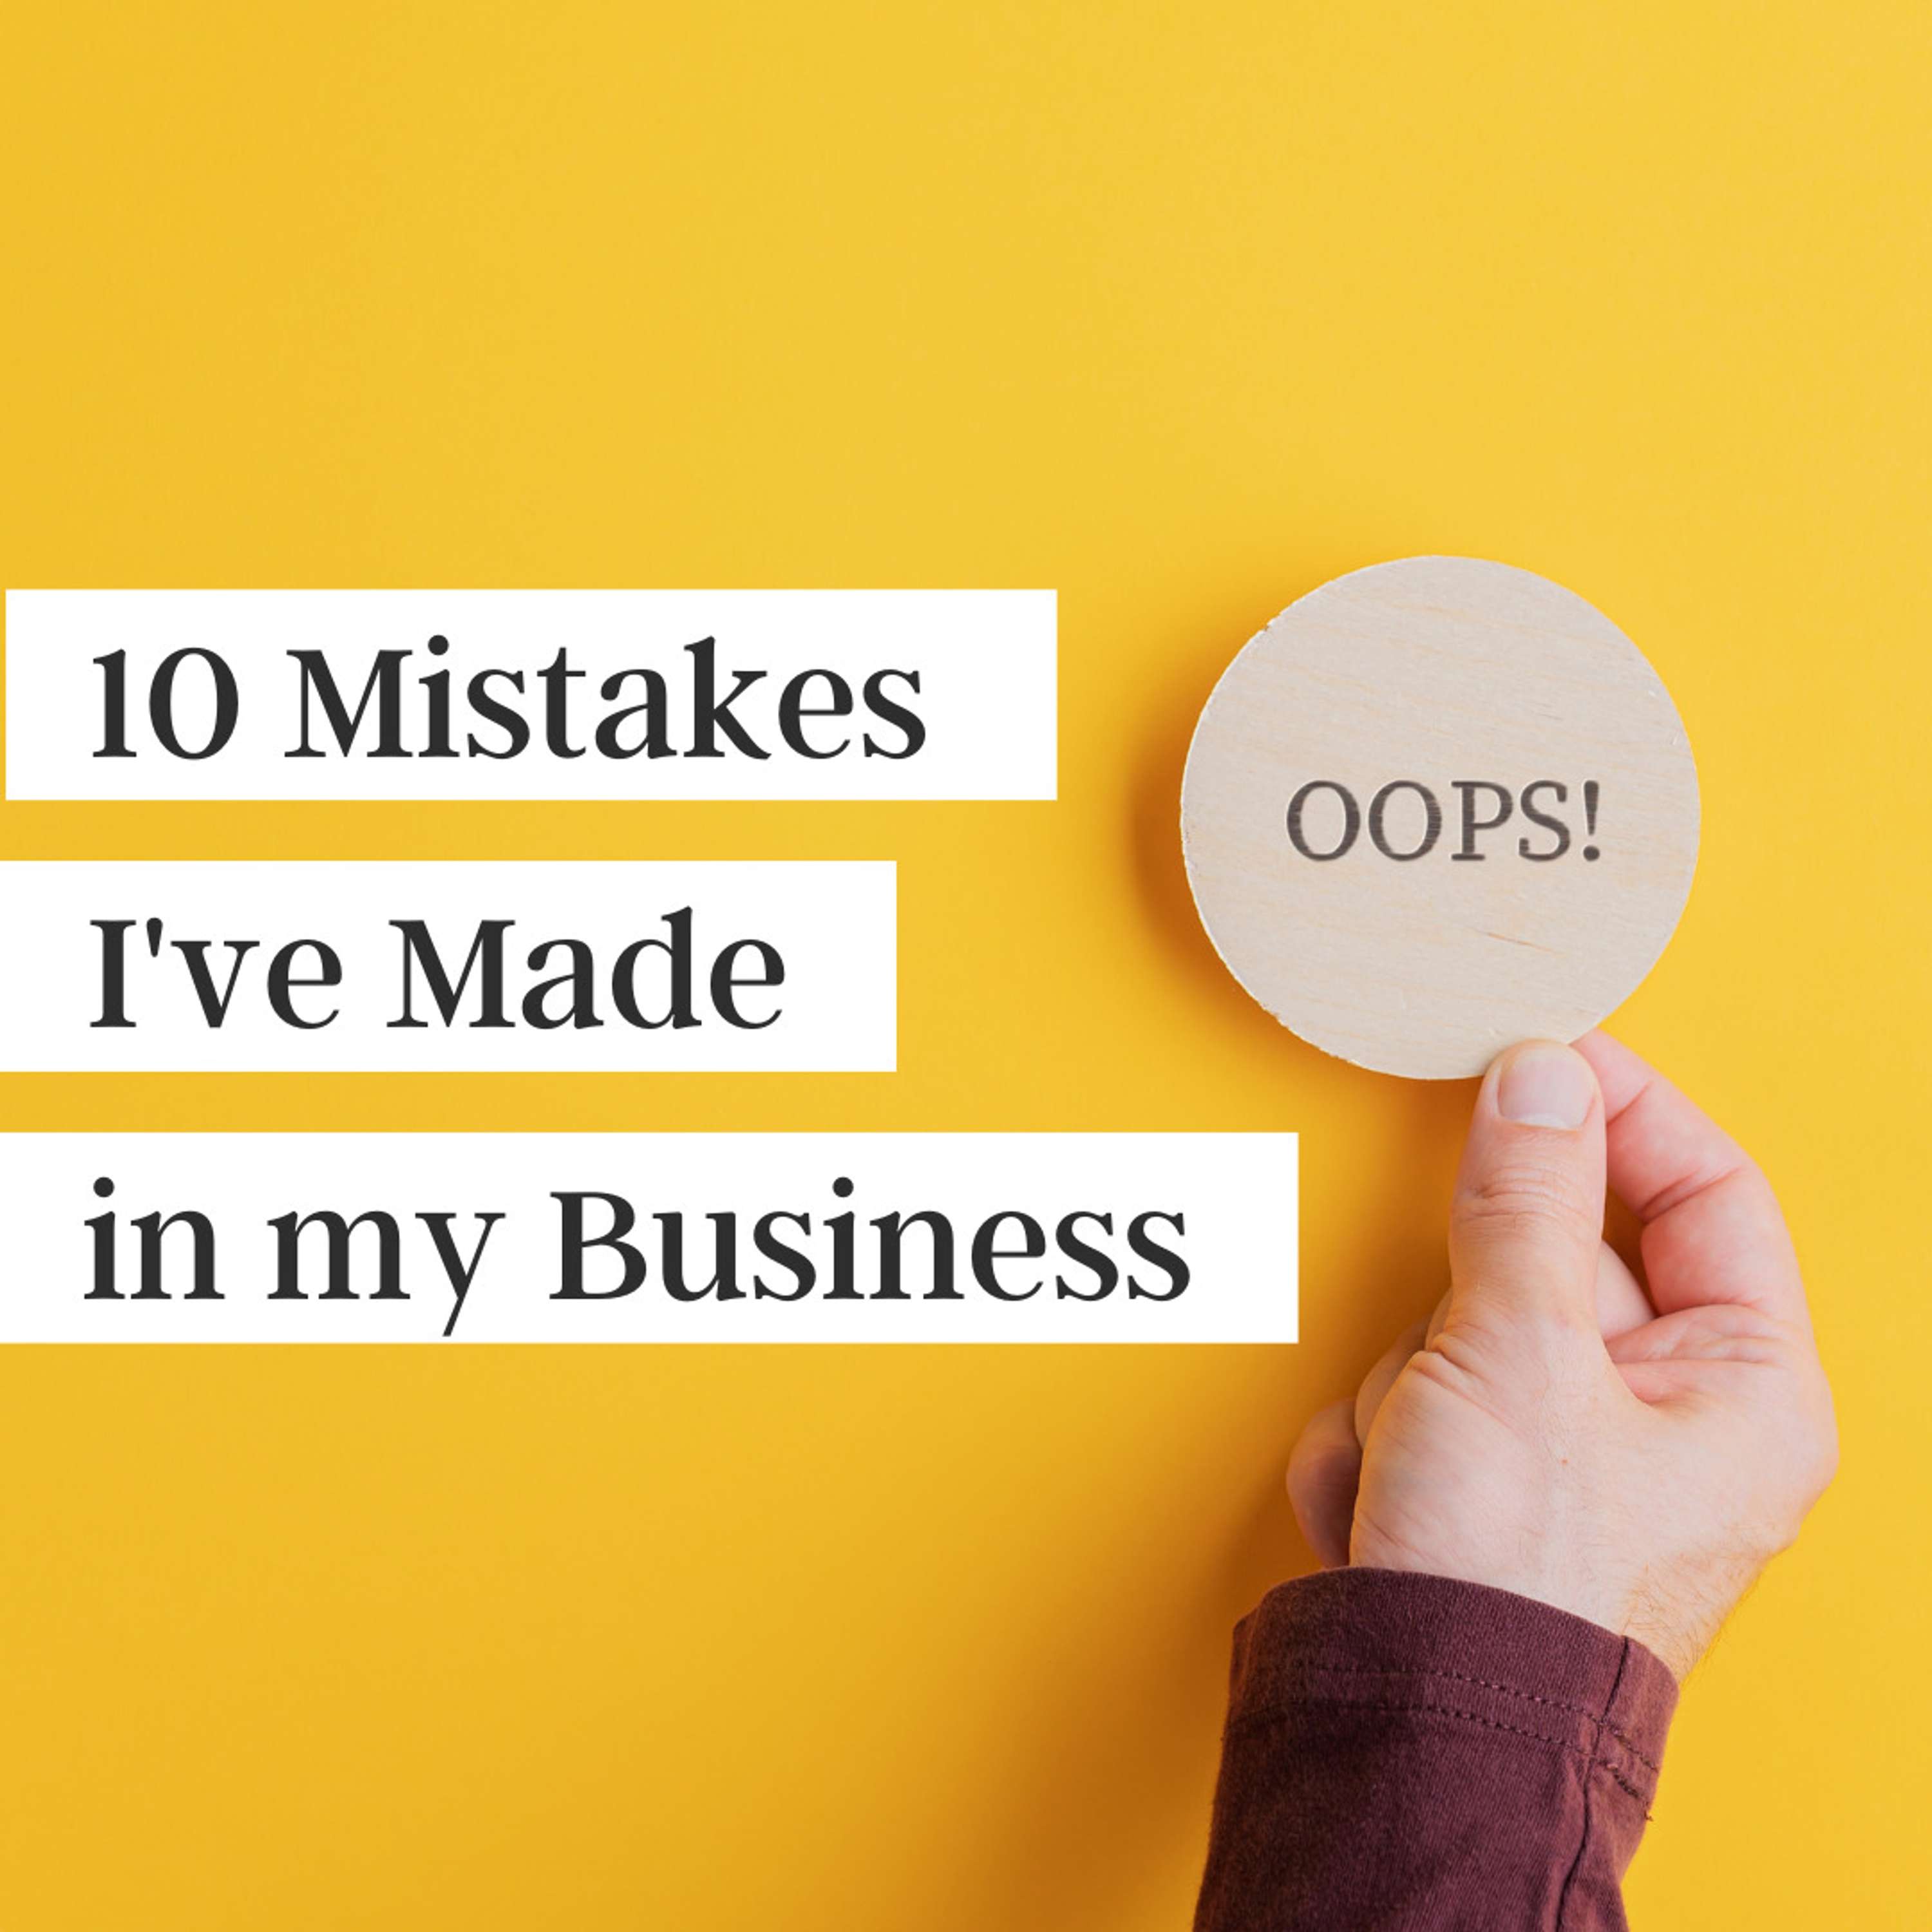 10 Mistakes I've Made in My Business